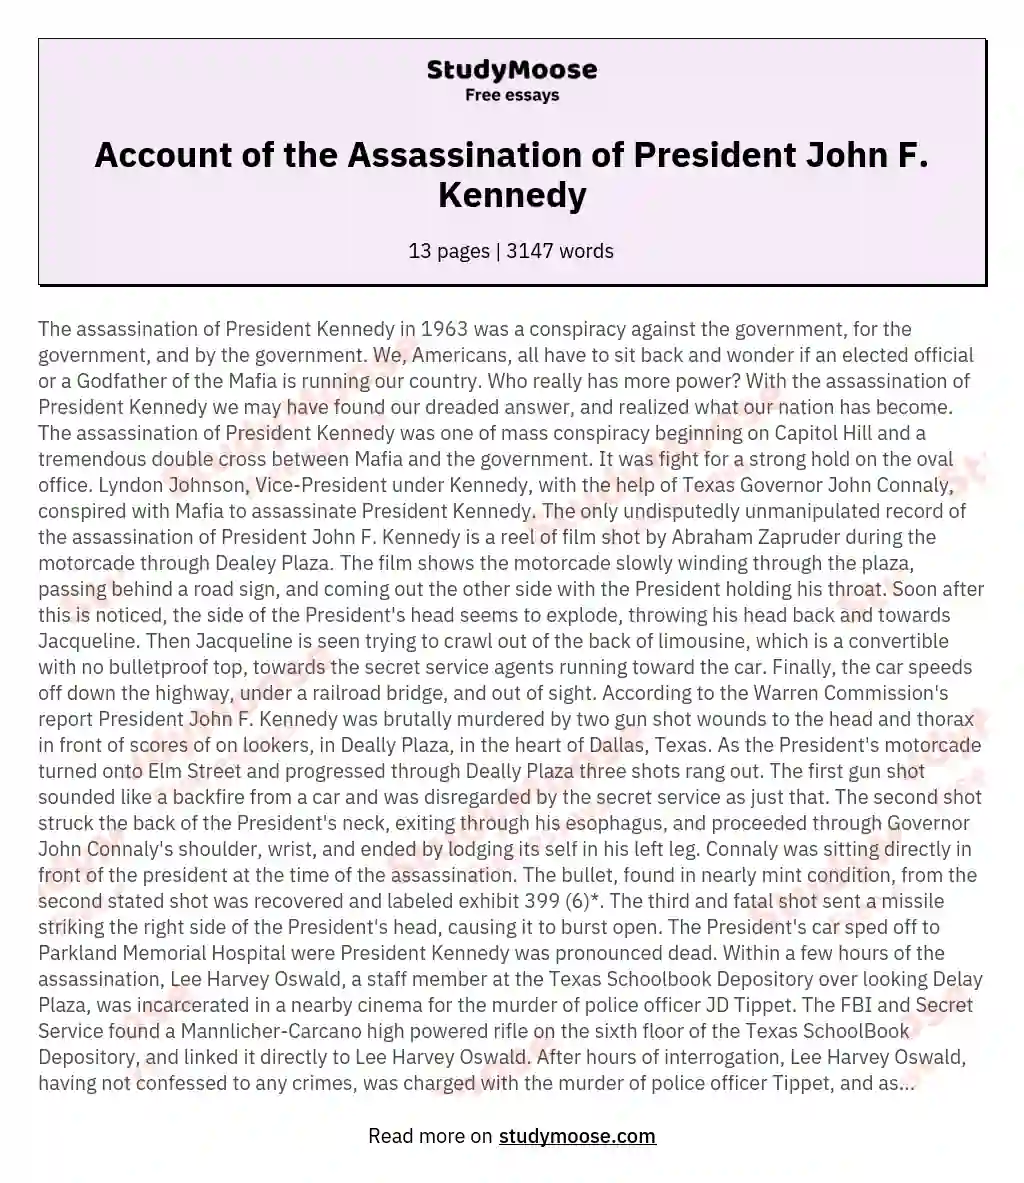 Account of the Assassination of President John F. Kennedy essay